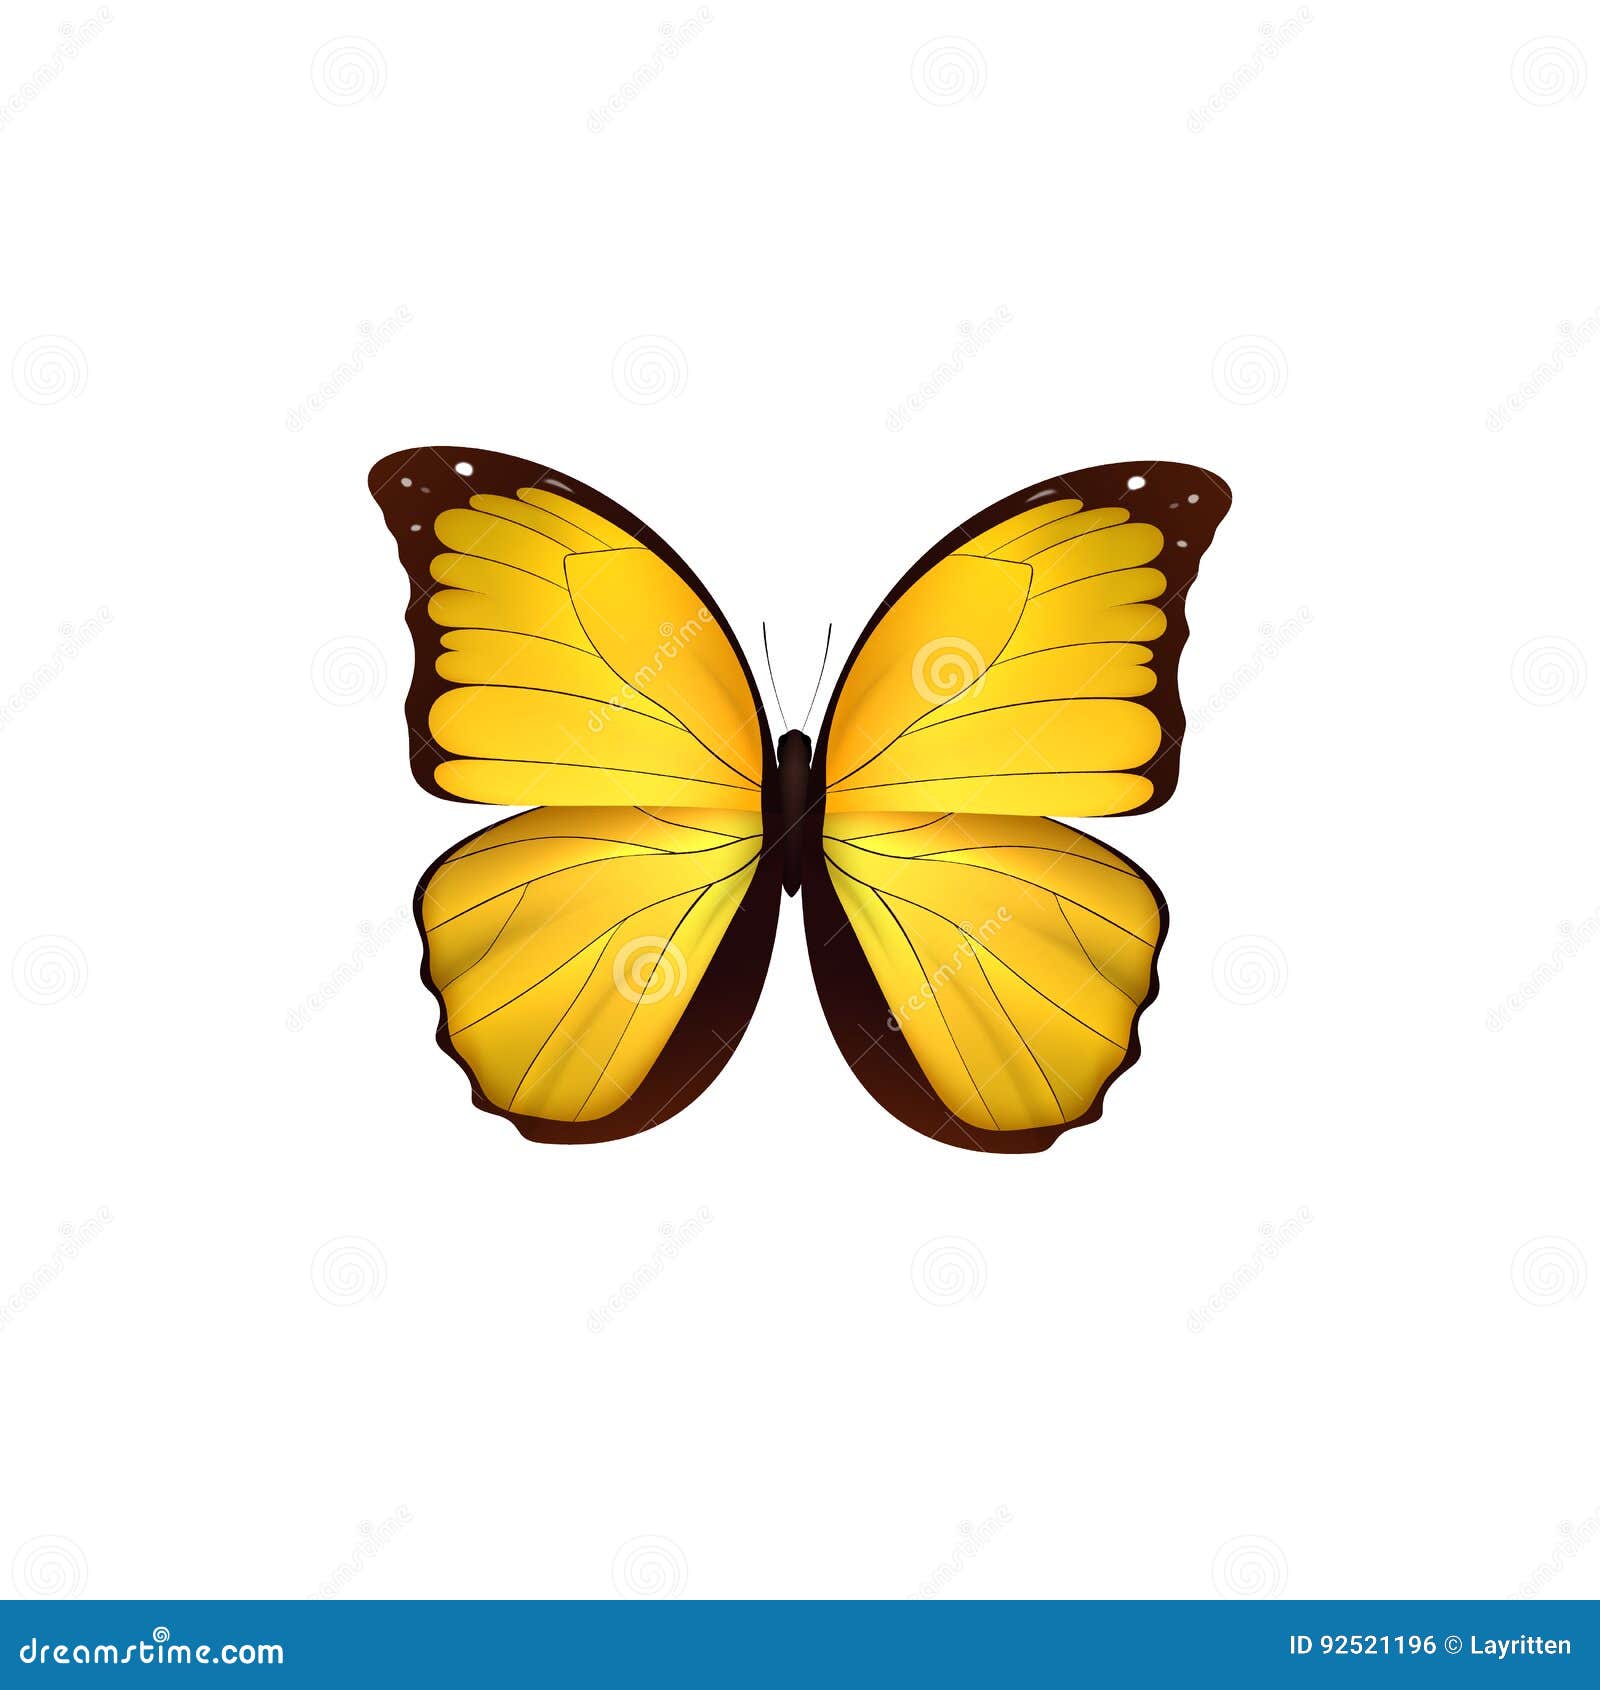 butterfly yellow  on white background. butterflies insects lepidoptera morpho amathonte.